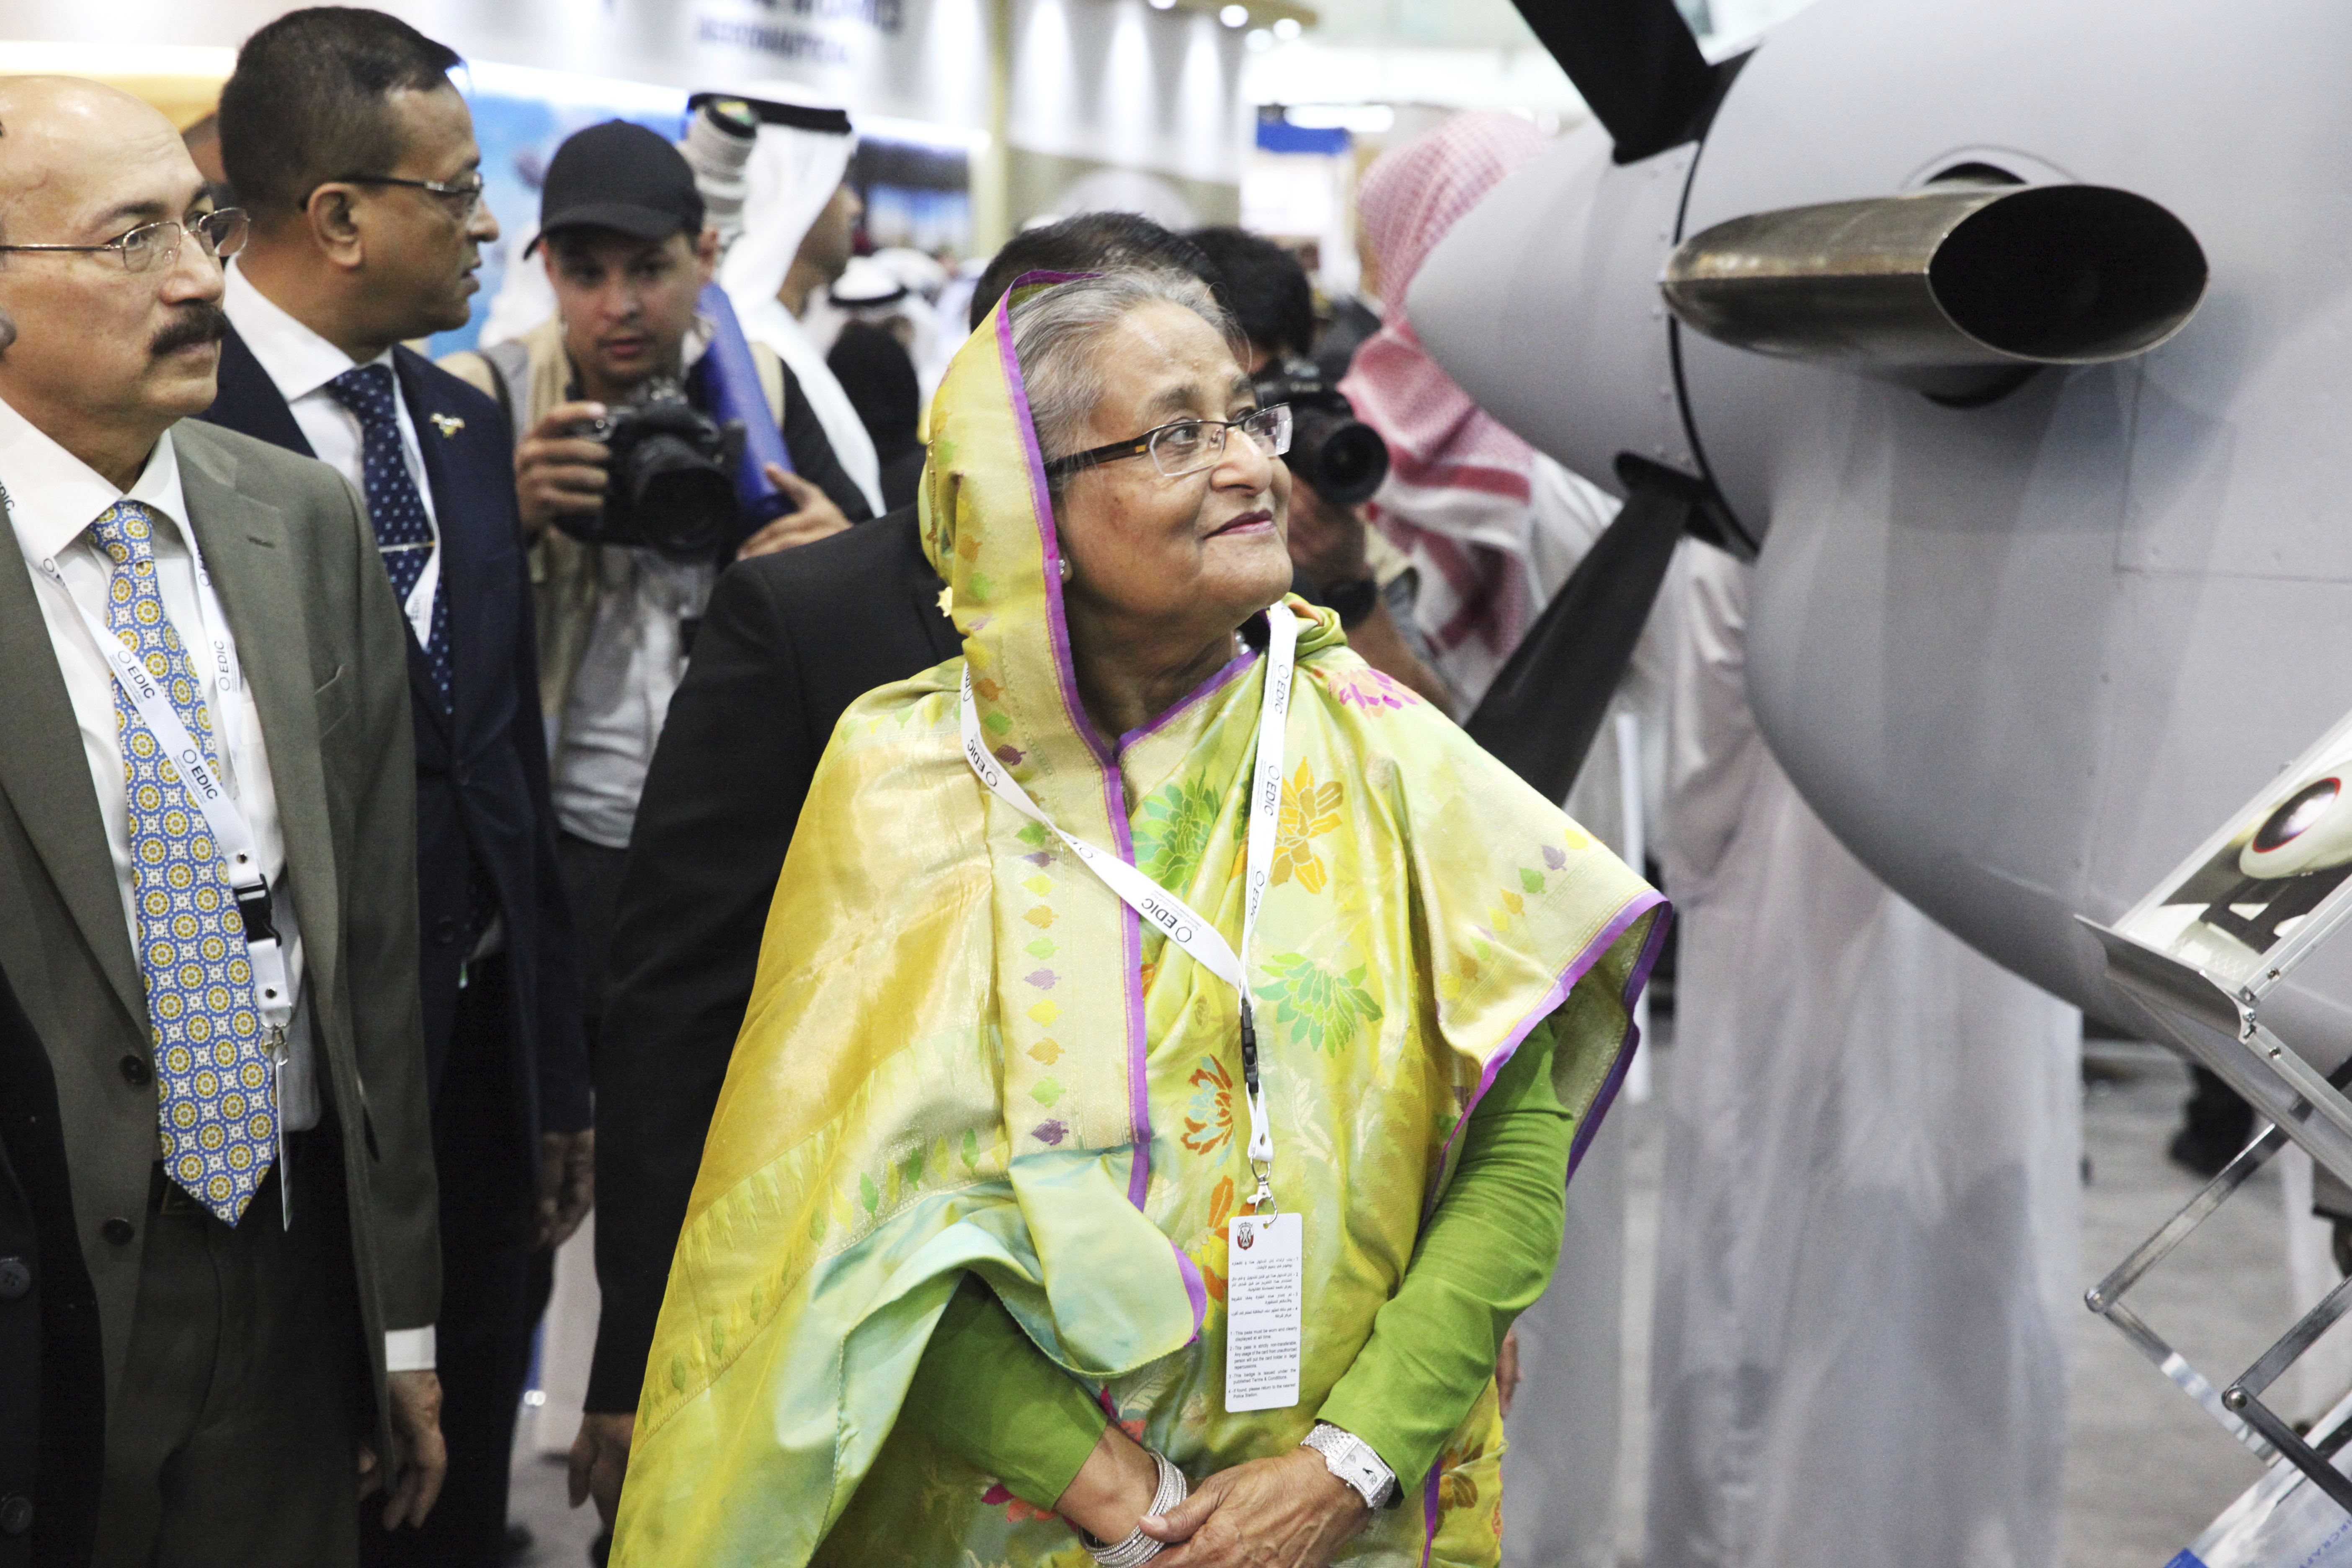 Bangladesh Prime Minister Sheikh Hasina examines a display at the International Defense Exhibition and Conference in Abu Dhabi, United Arab Emirates, Sunday, Feb. 17, 2019. The biennial arms show in Abu Dhabi comes as the United Arab Emirates faces increasing criticism for its role in the yearlong war in Yemen. (AP Photo/Jon Gambrell)